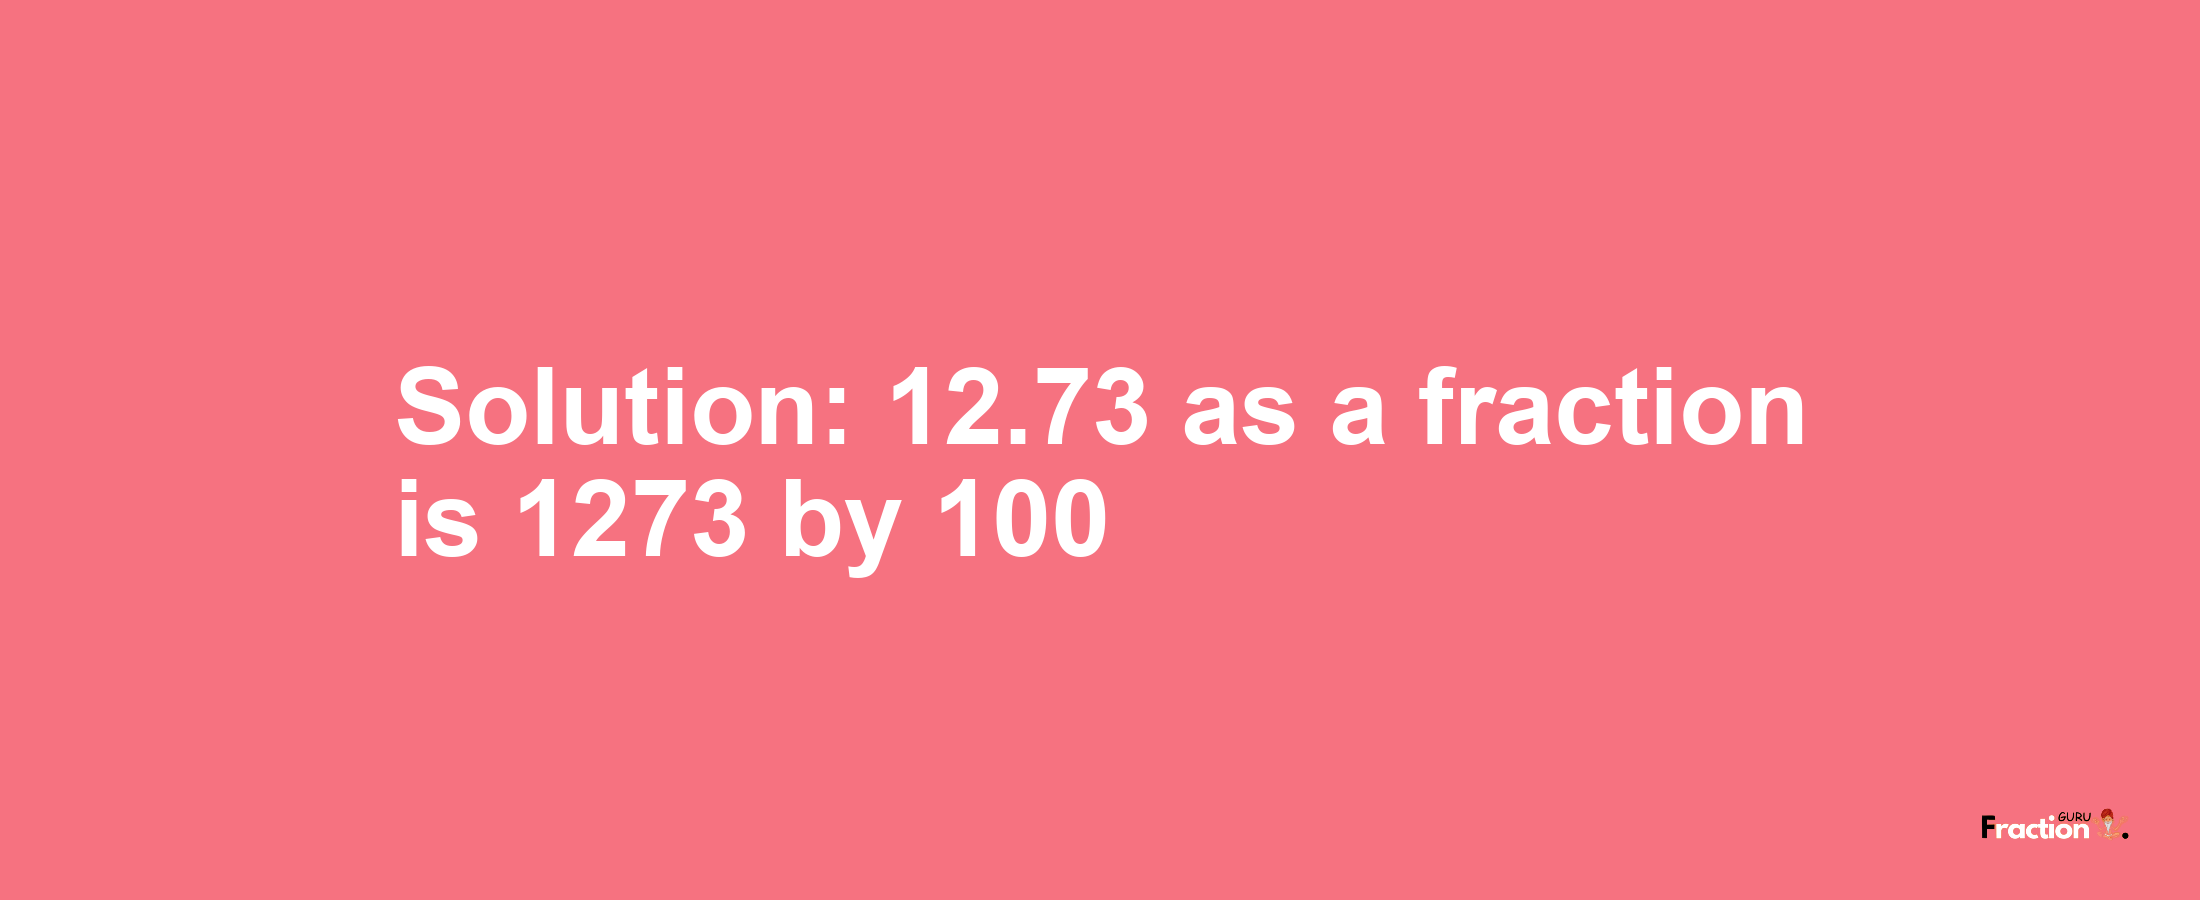 Solution:12.73 as a fraction is 1273/100